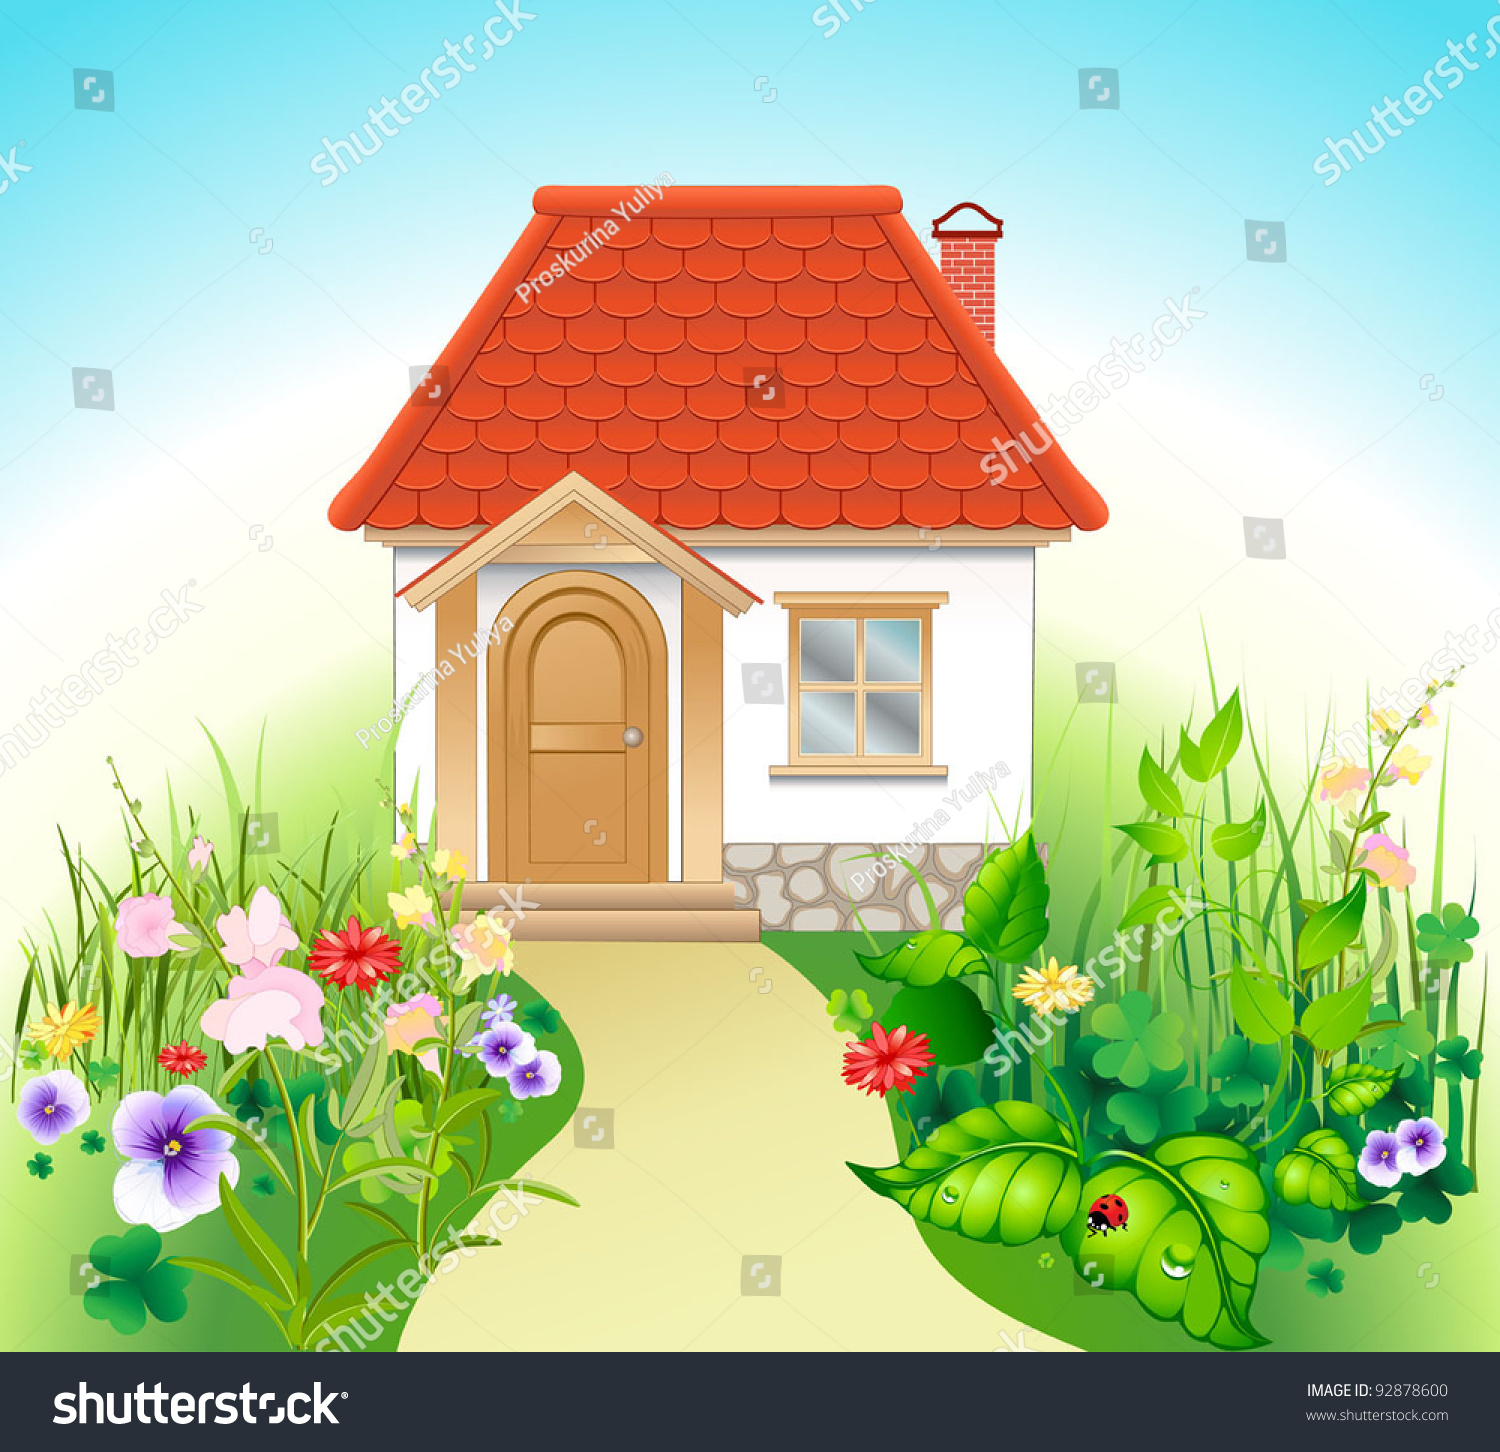 house with garden clipart - photo #2